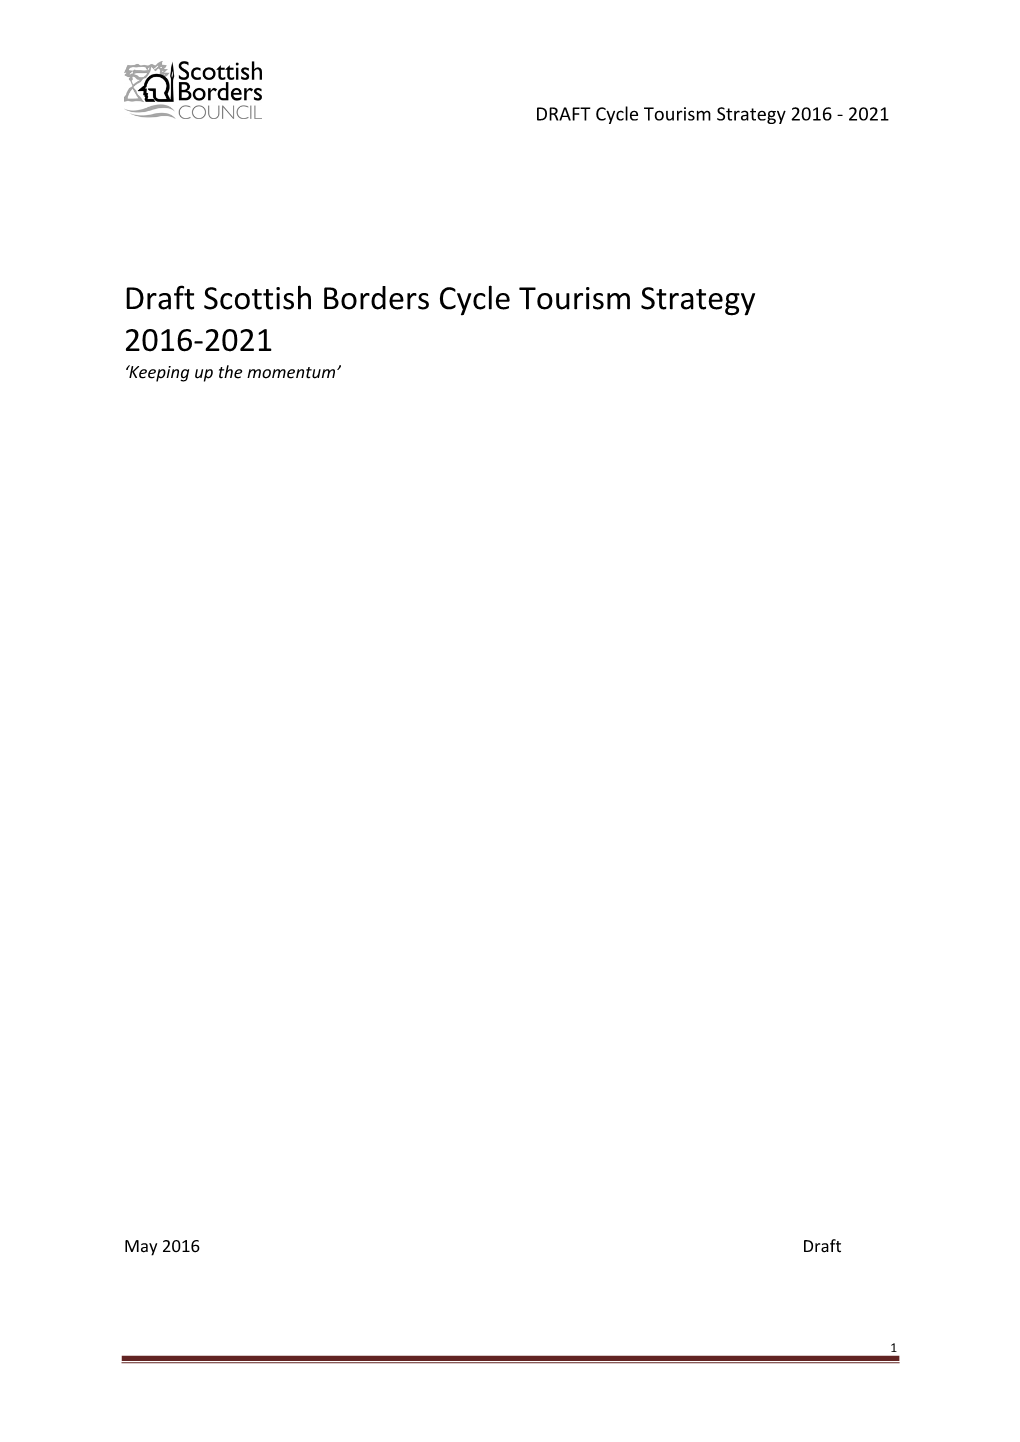 Draft Scottish Borders Cycle Tourism Strategy 2016-2021 ‘Keeping up the Momentum’